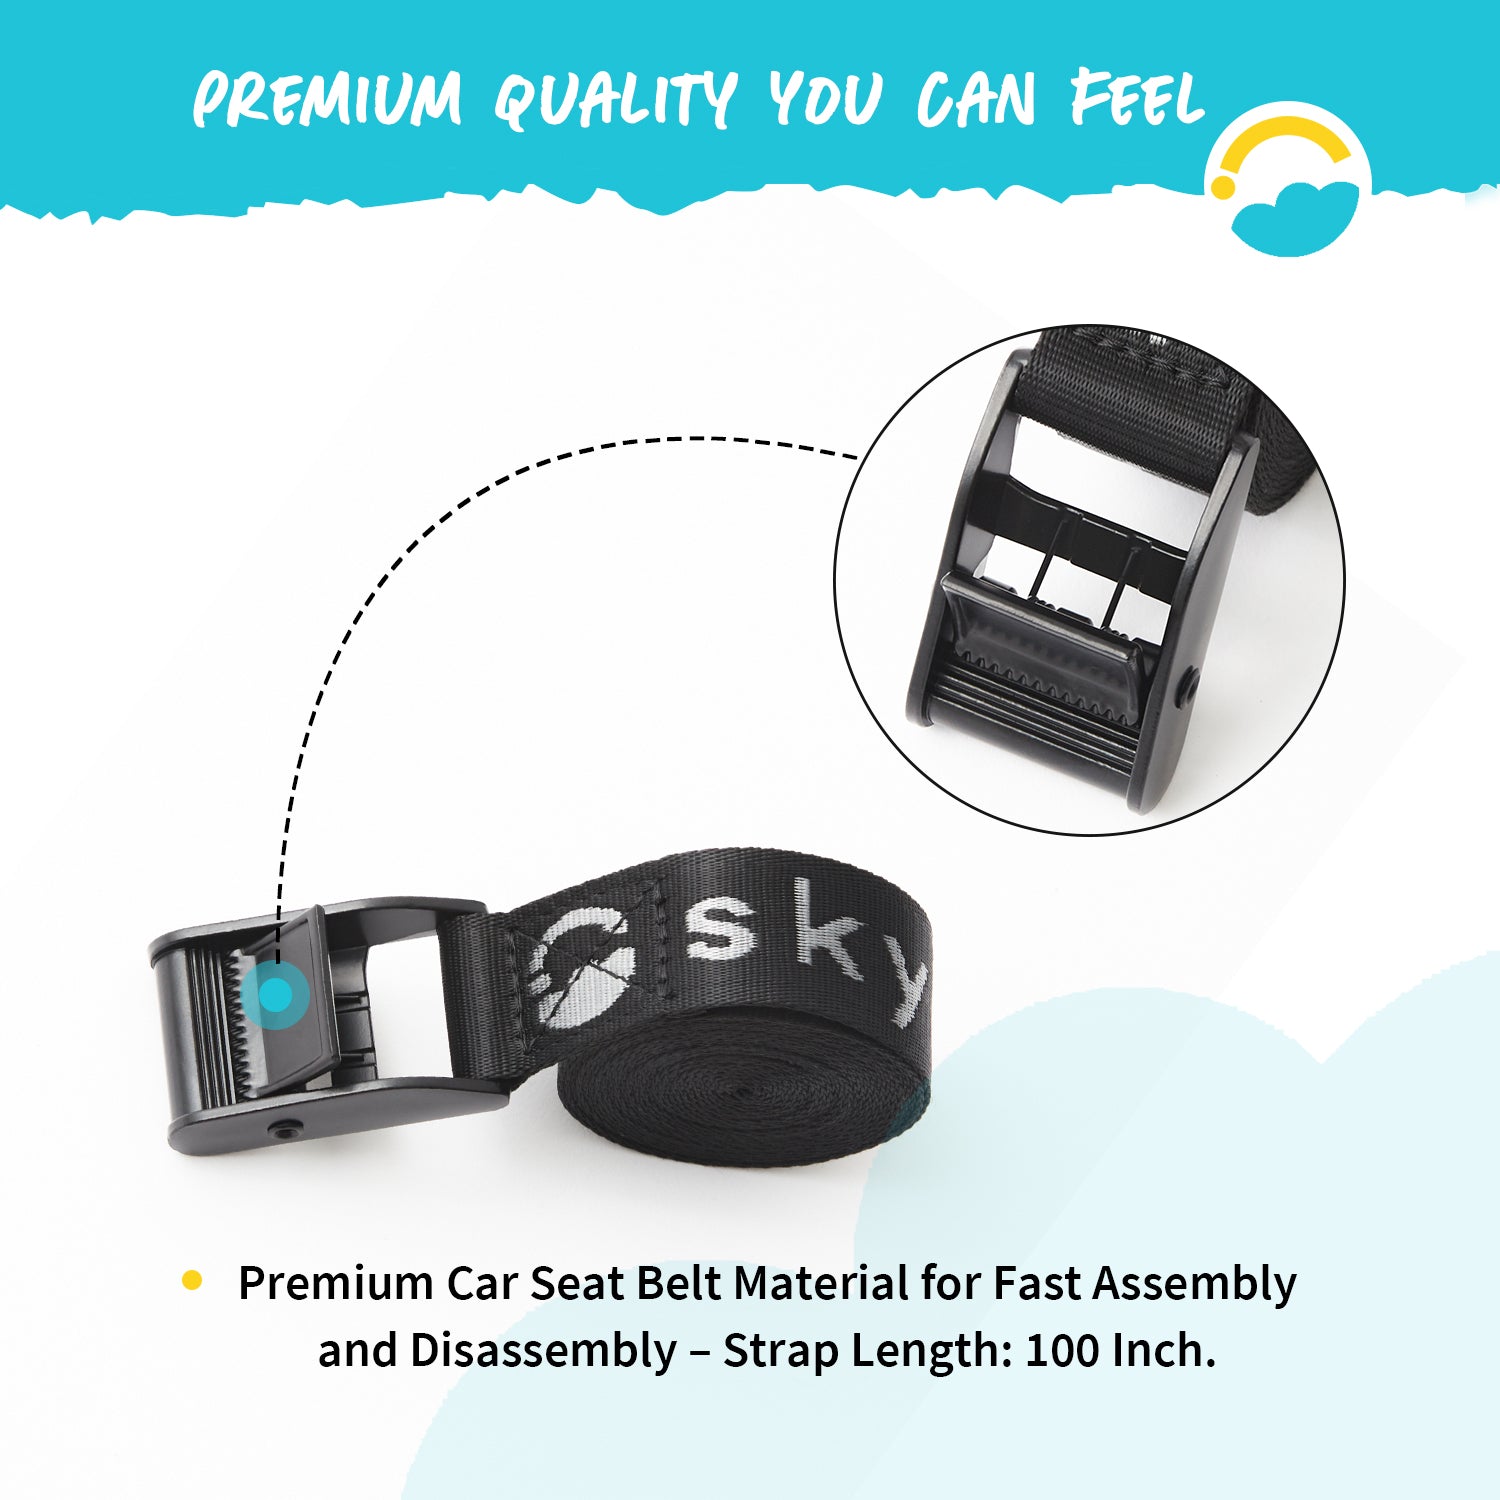 Premium Quality you Can Feel: Premium Car Seat Belt Materail for Fast Assembly and Disassembly-Strap Length: 100 Inch.